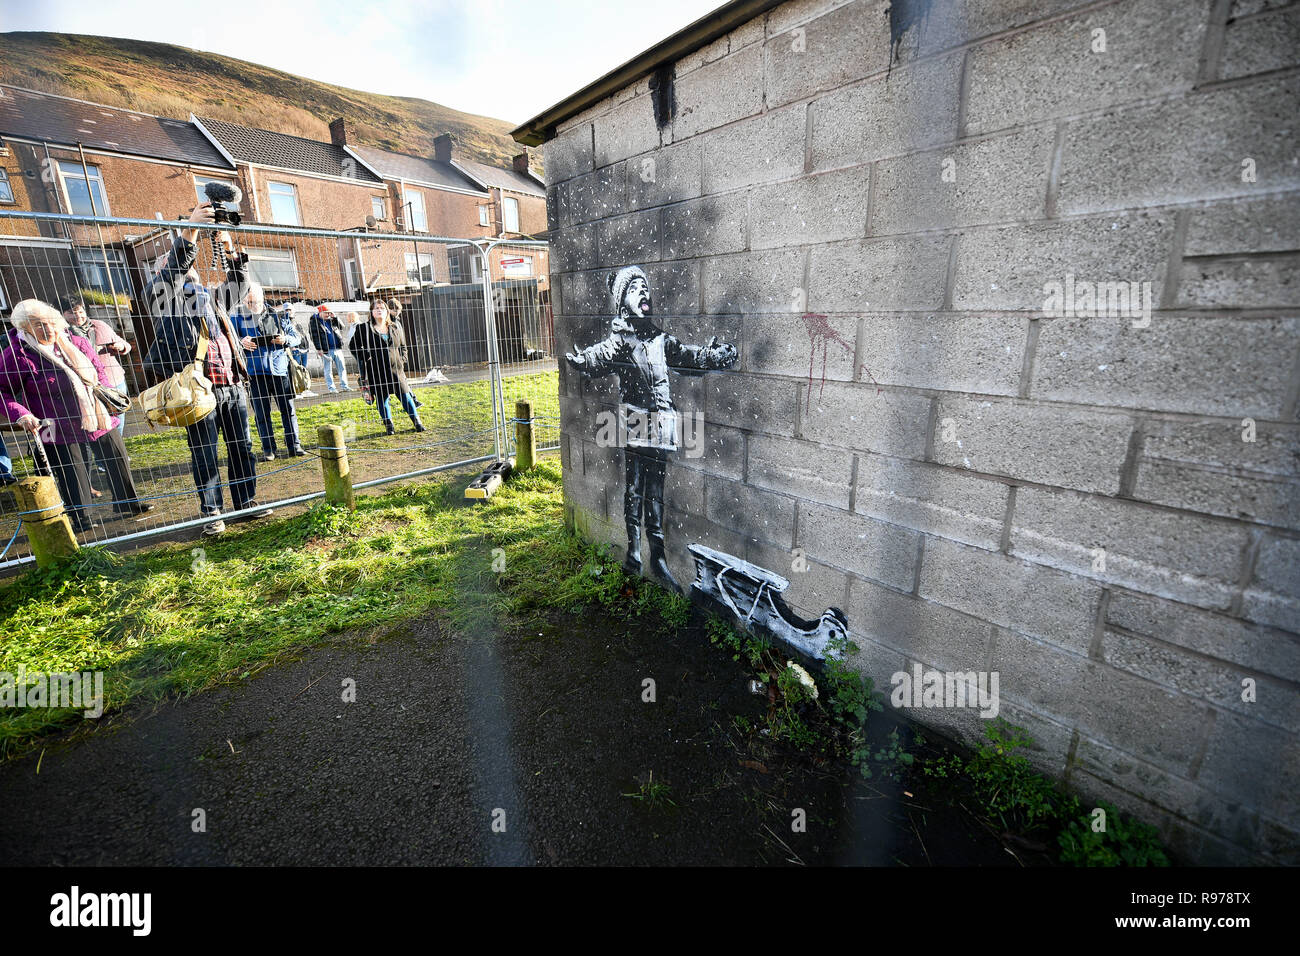 Metal fencing protects an artwork by street artist Banksy, which has appeared on a garage wall in Taibach, Port Talbot, south Wales. The painting appeared overnight and shows a child playing in the falling ash and smoke from a fire in a skip. Stock Photo